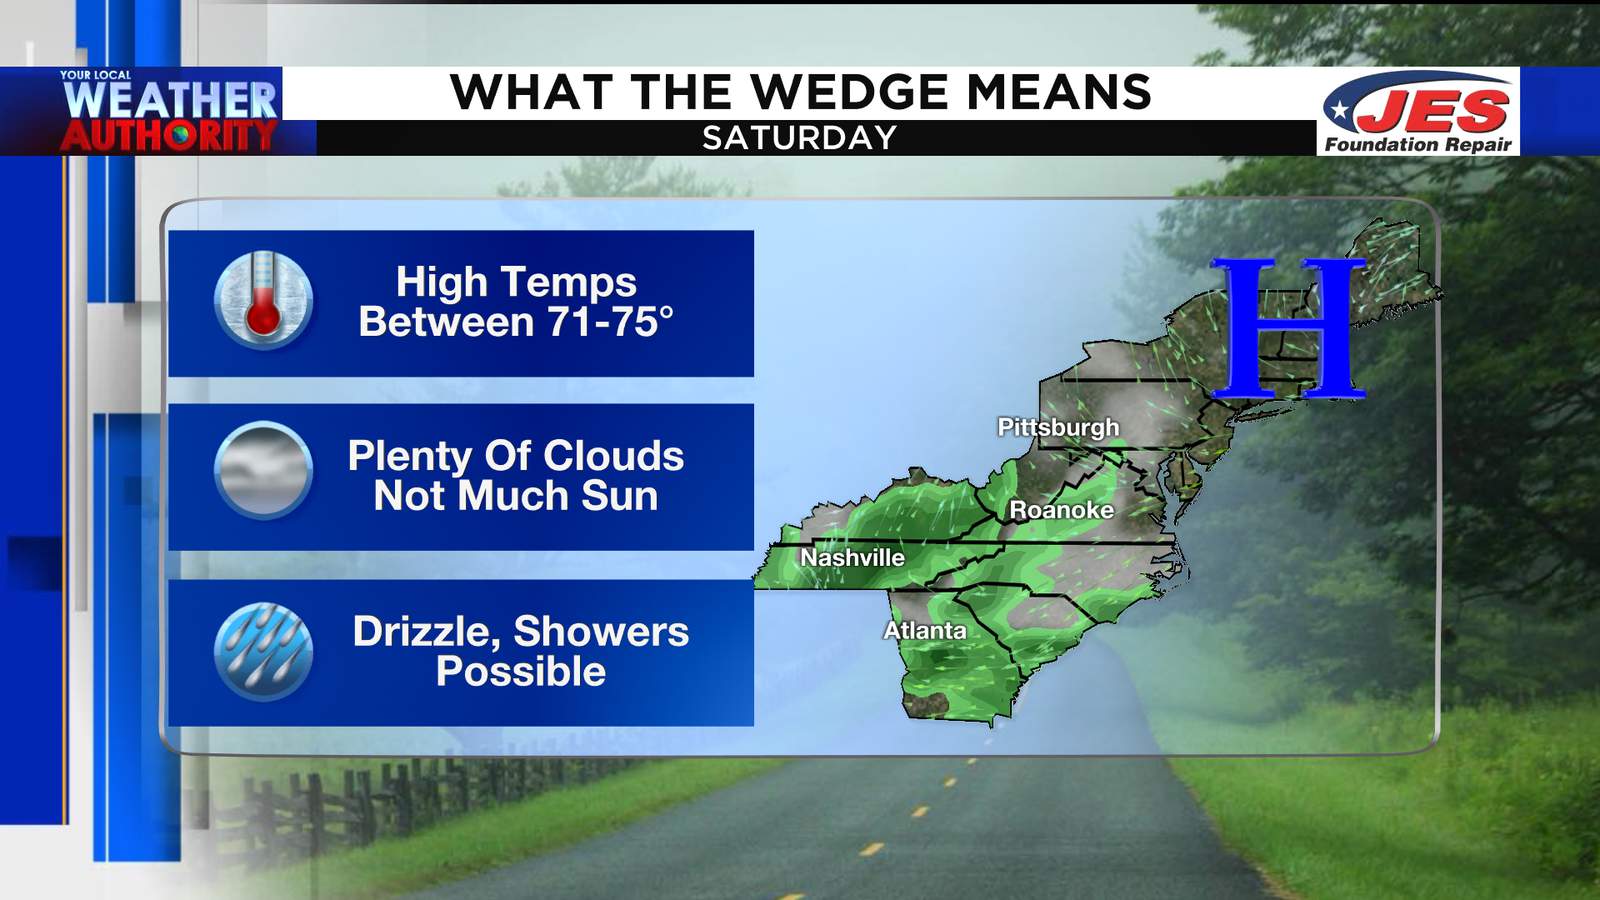 You can blame “the wedge” for our gloomy Saturday weather